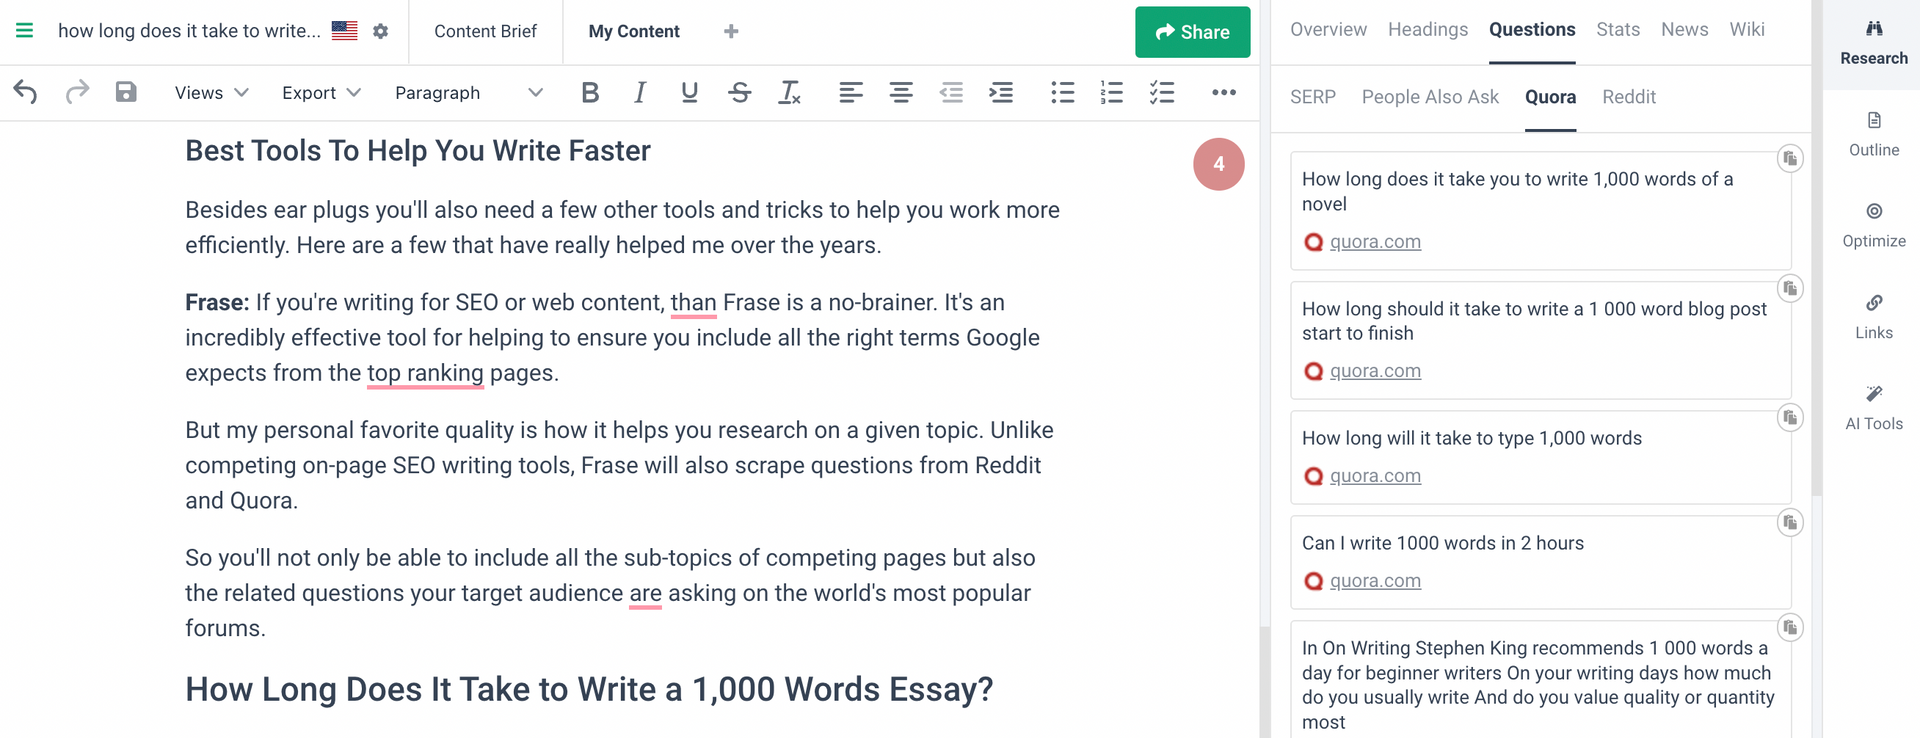 how to write a 1000 word essay in 2 hours